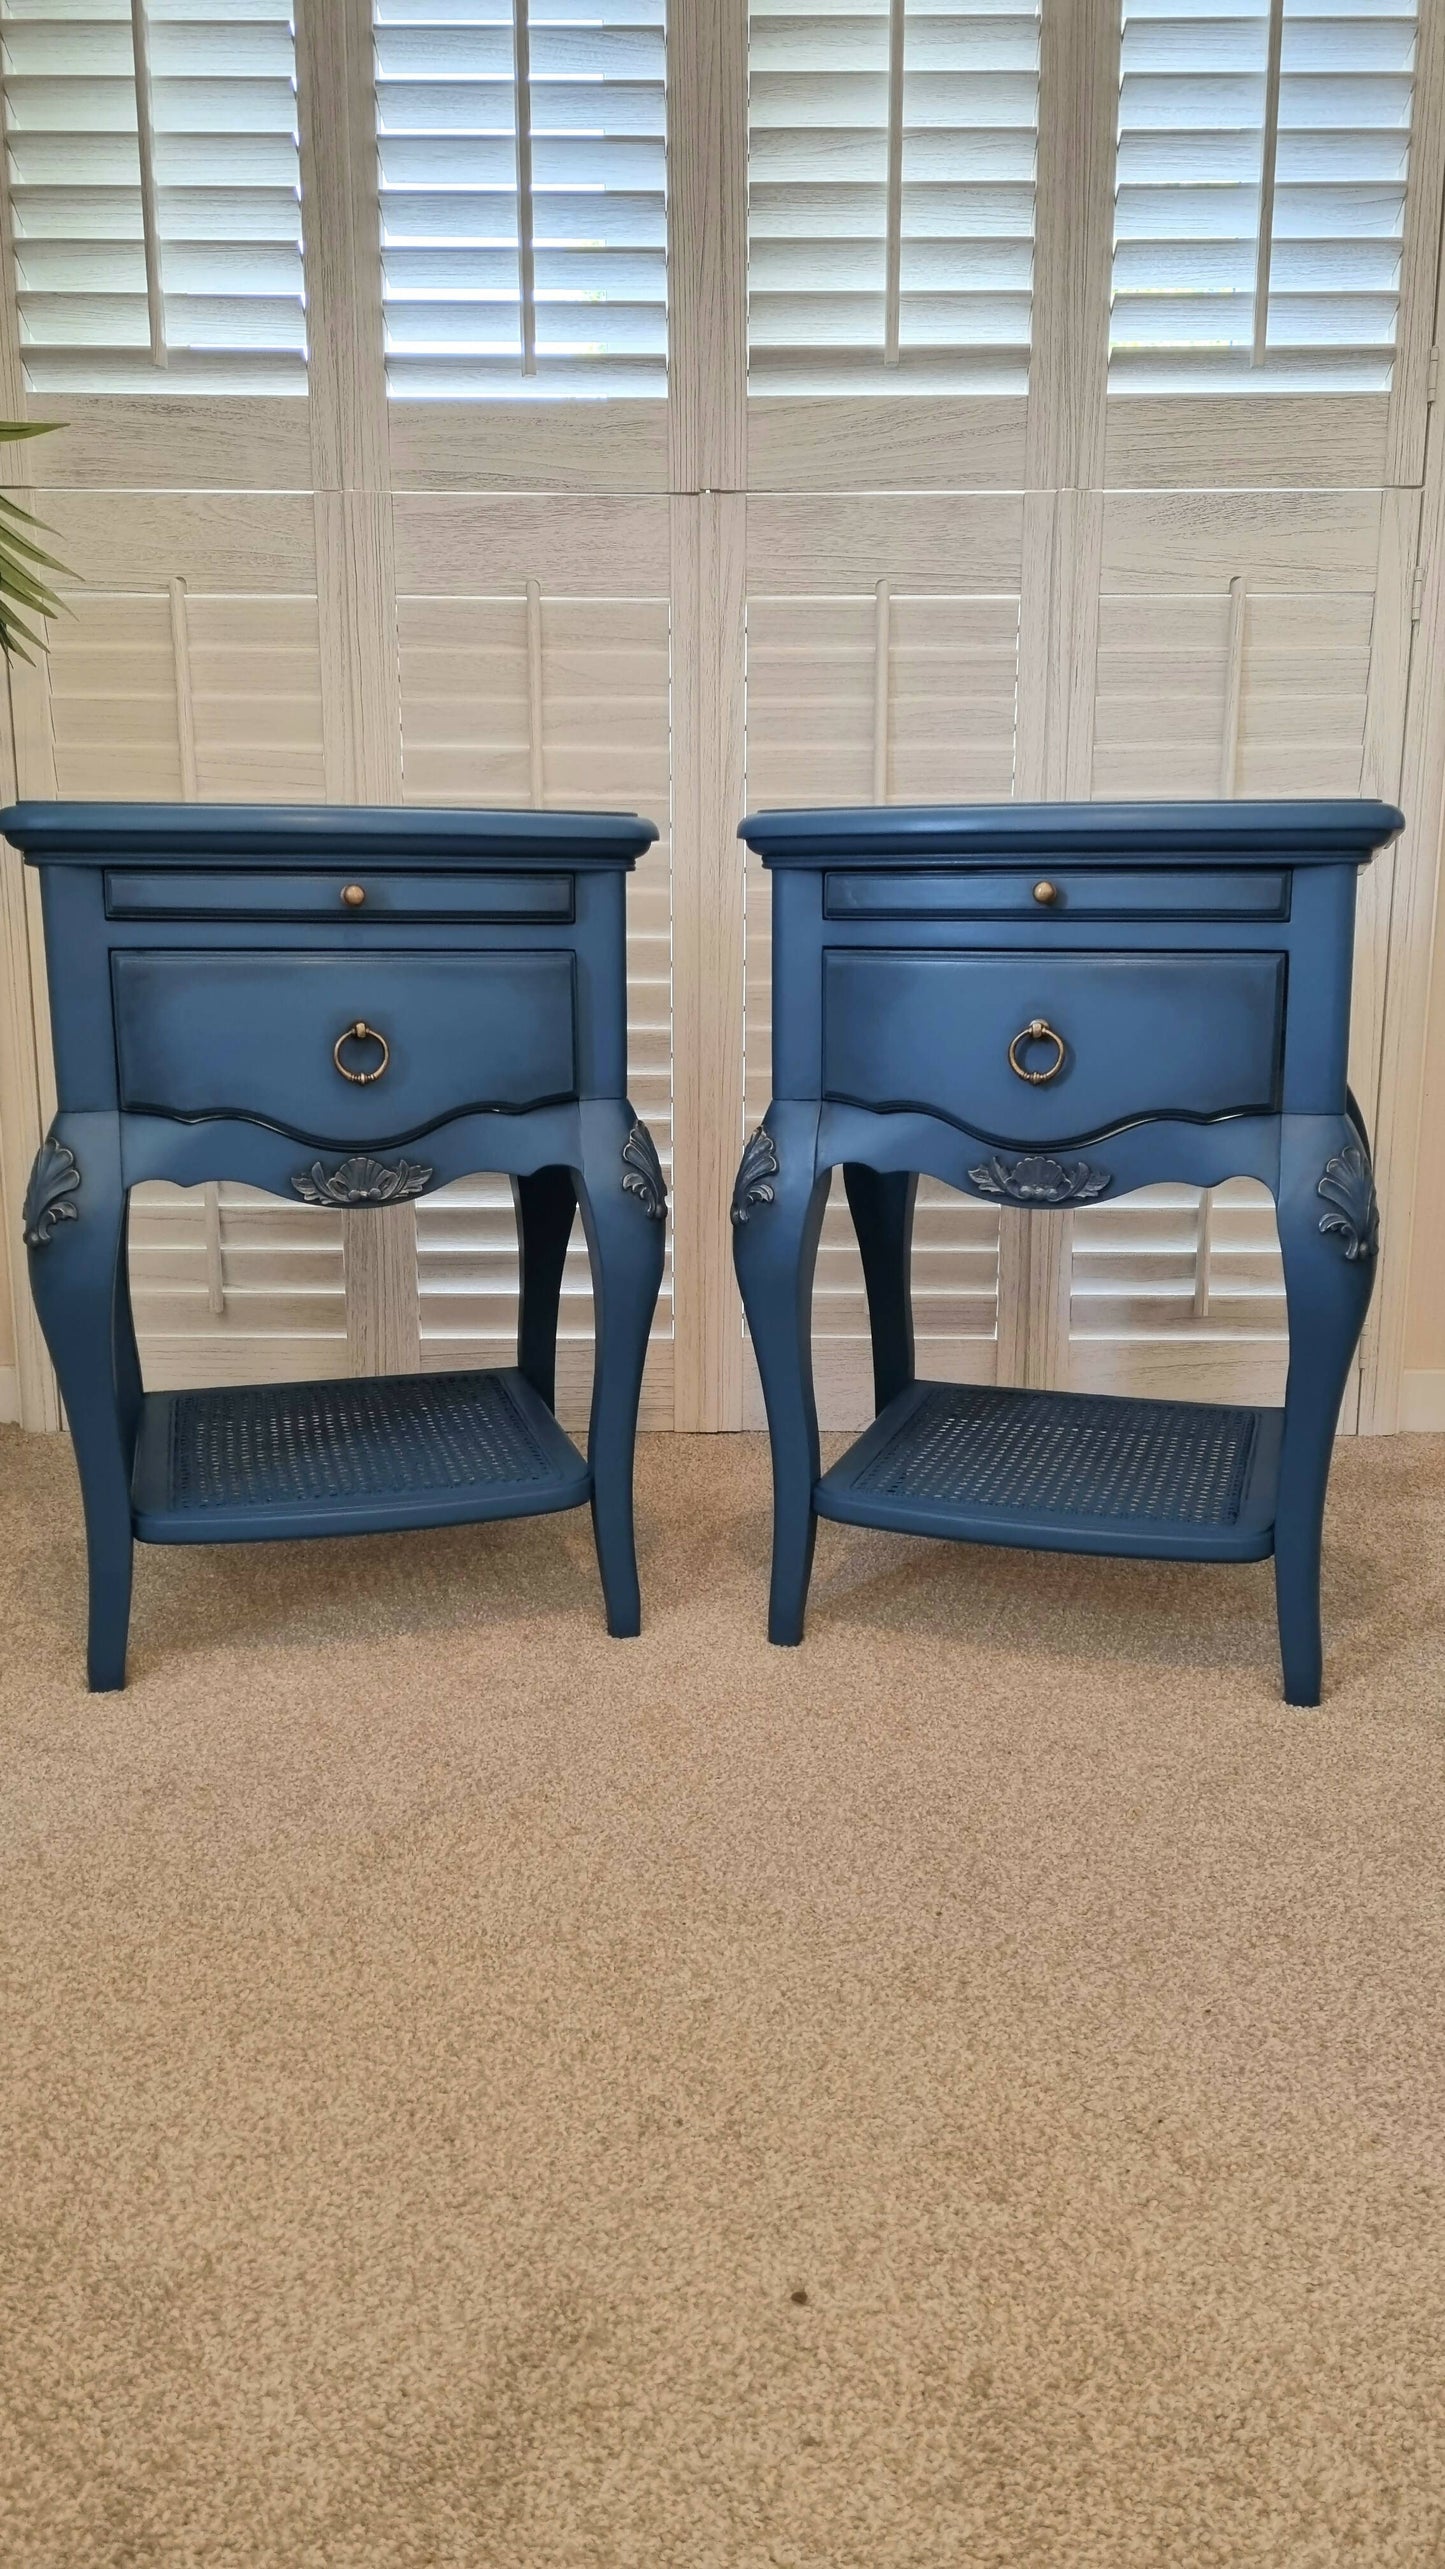 Pair of John Lewis french style bedside cabinets